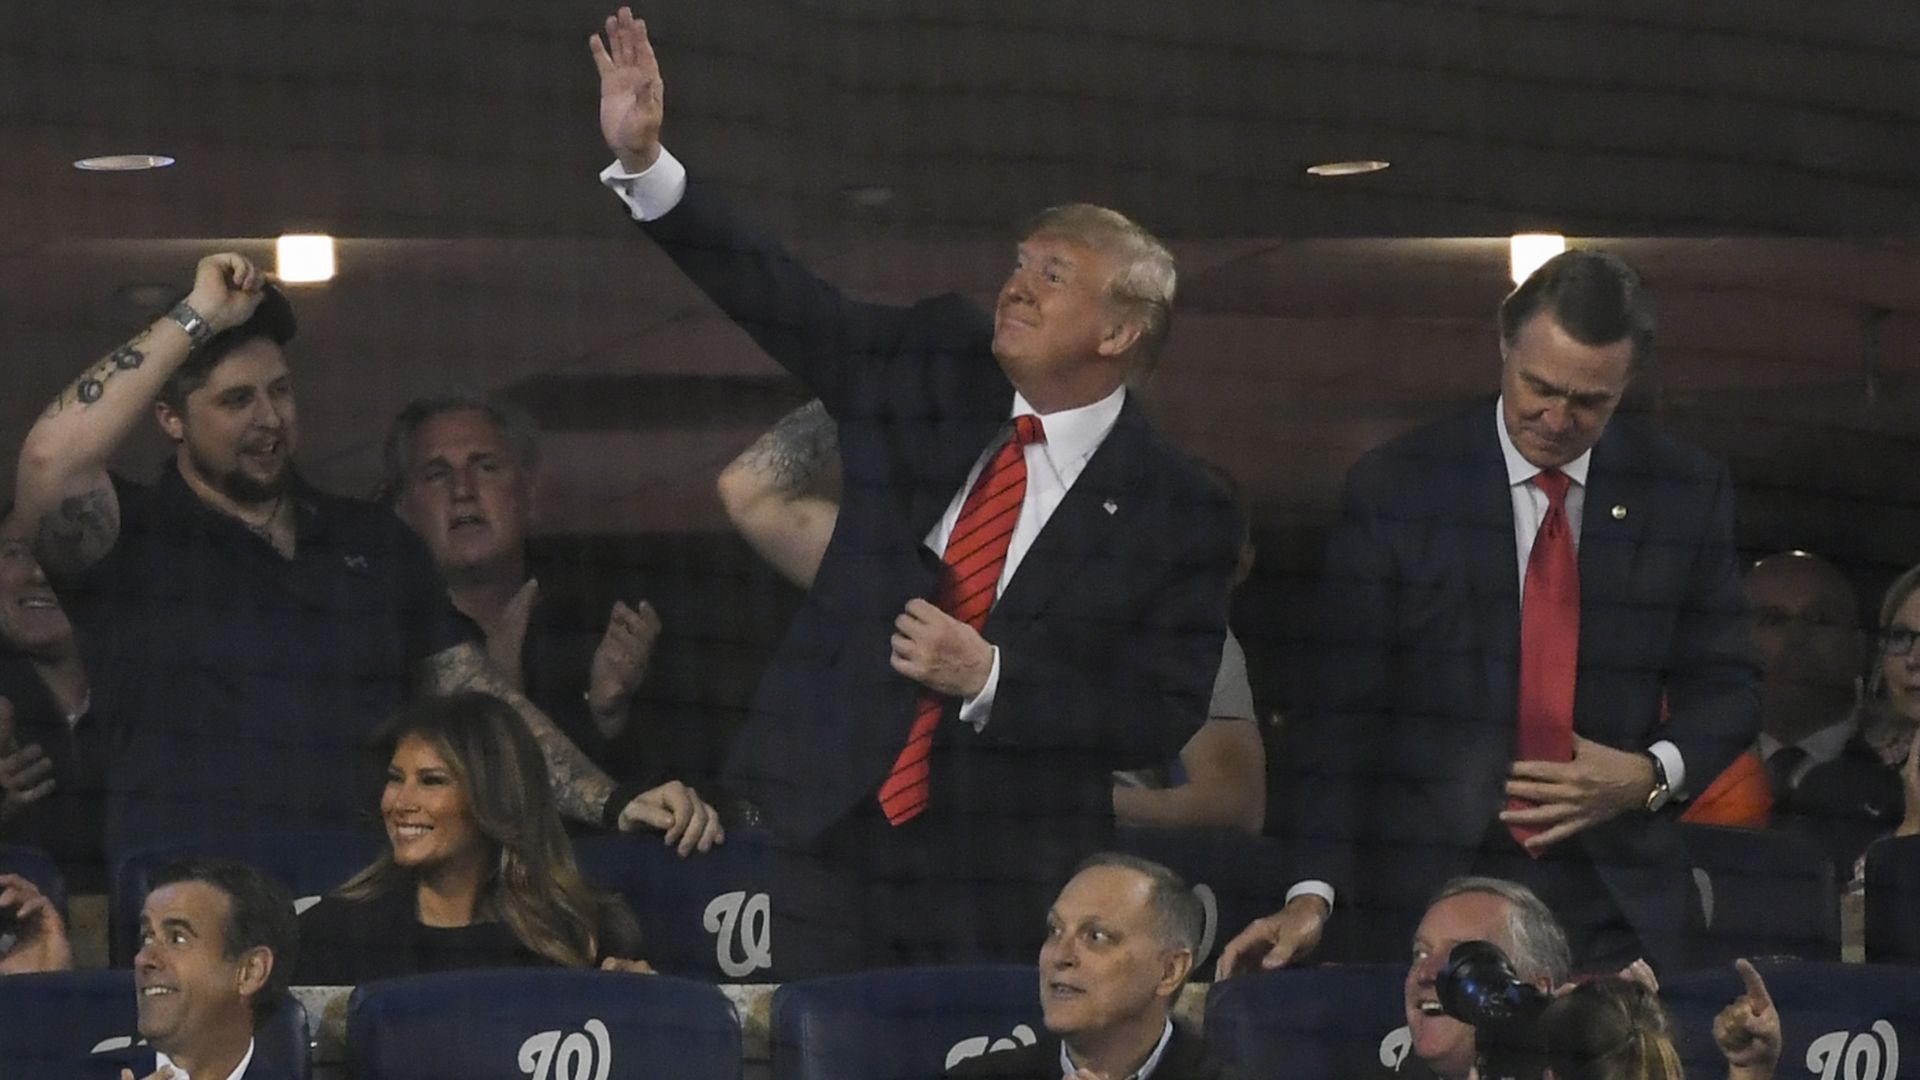 President Trump waves during Game 5 of the World Series as House Minority Leader Kevin McCarthy claps.